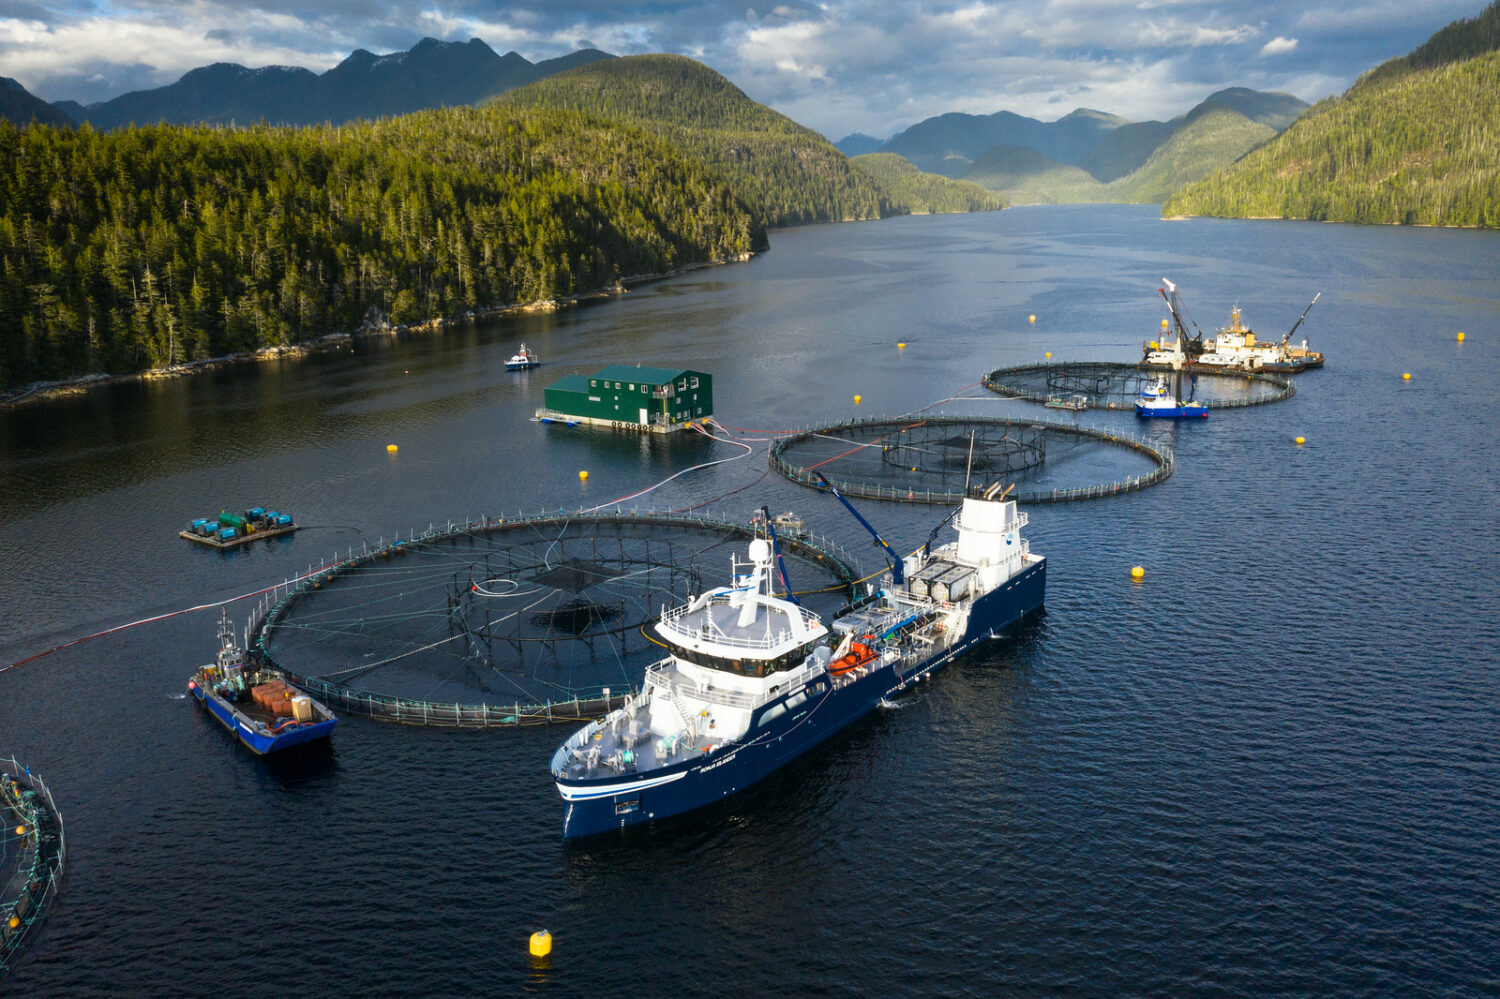 Here's Why We're Working To End Open Net-Pens in B.C. - Wild Salmon Center